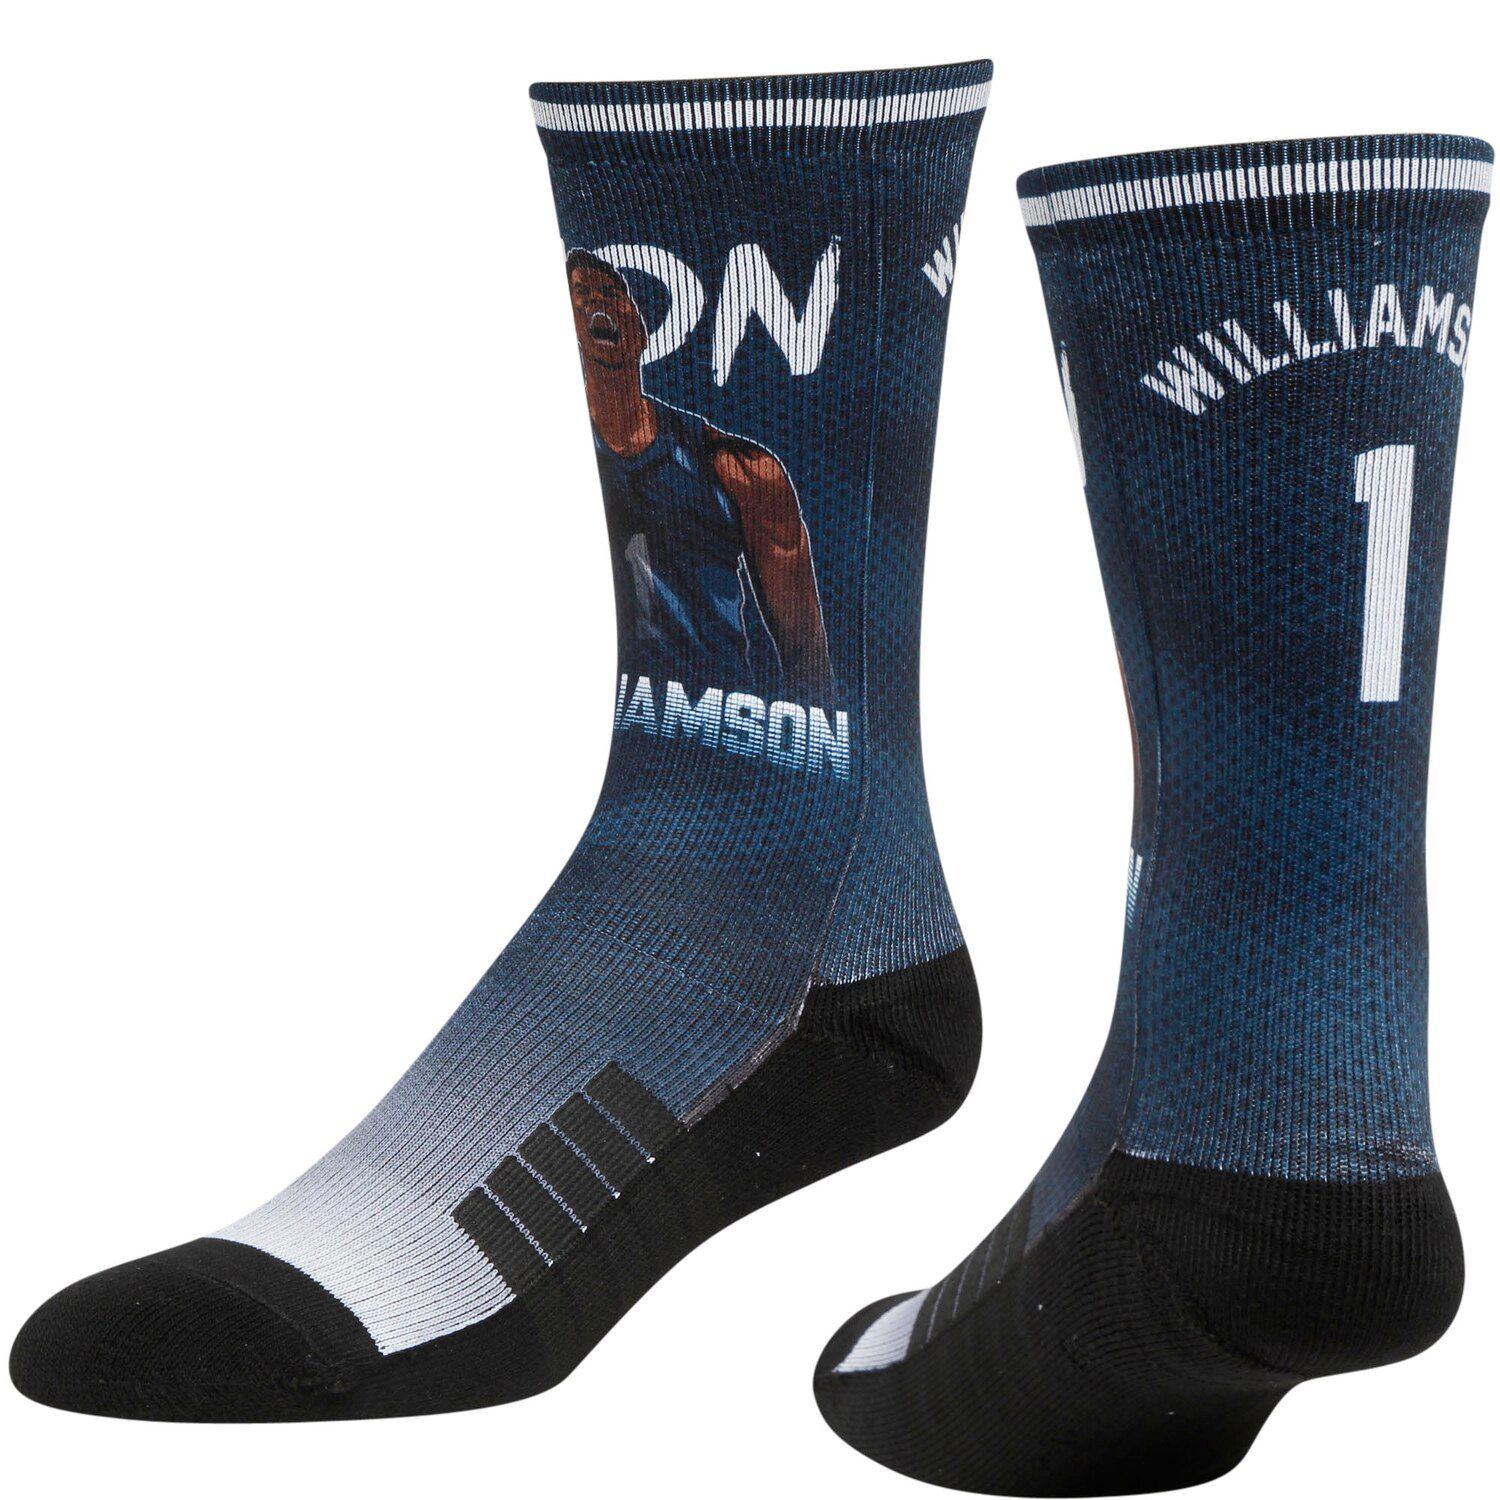 Image for Unbranded Strideline Zion Williamson New Orleans Pelicans Premium Comfy Crew Socks at Kohl's.